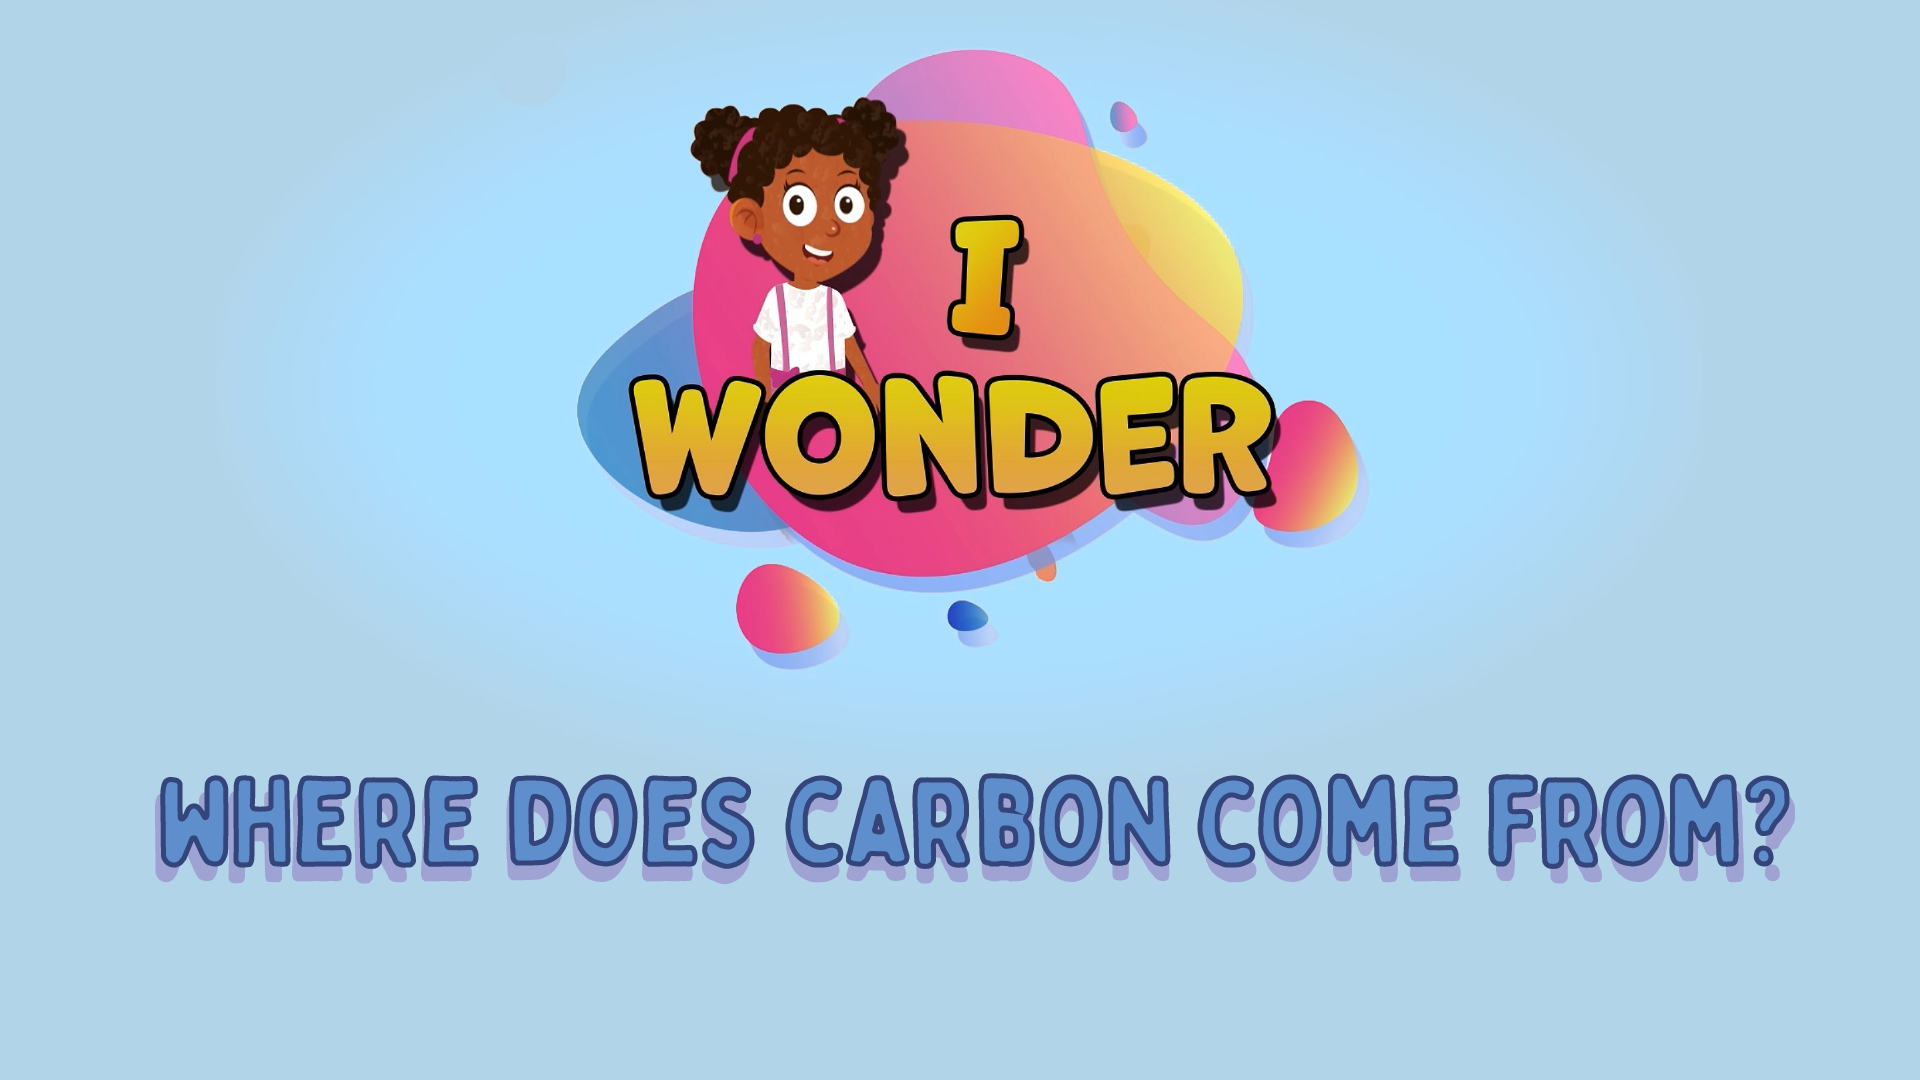 Where Does Carbon Come From?